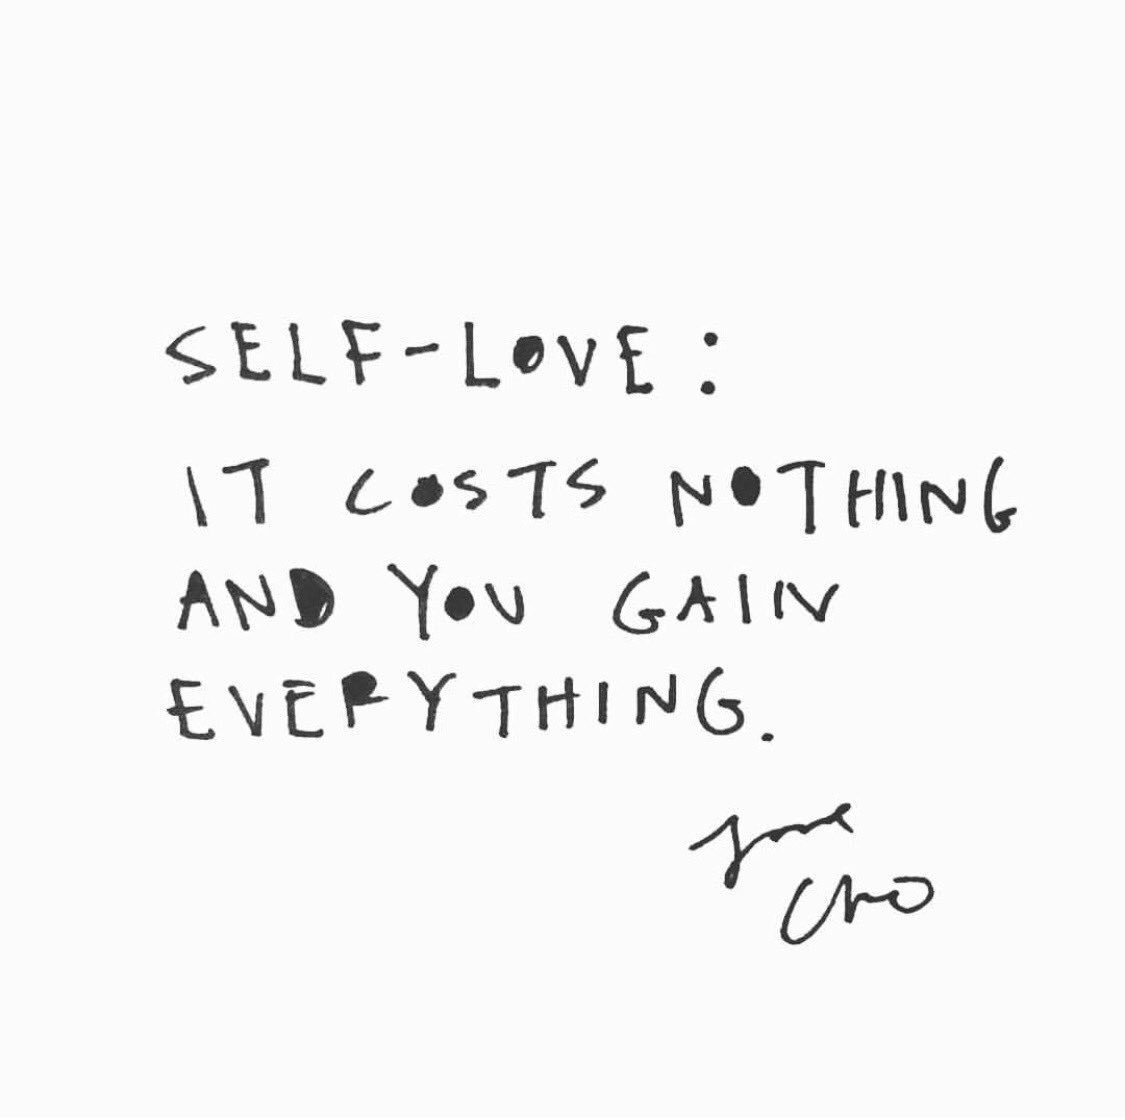 Never underestimate the power of #SelfLove. ???????????? #WednesdayWisdom via the lovely #CleoWade https://t.co/rSFPN3YiC4